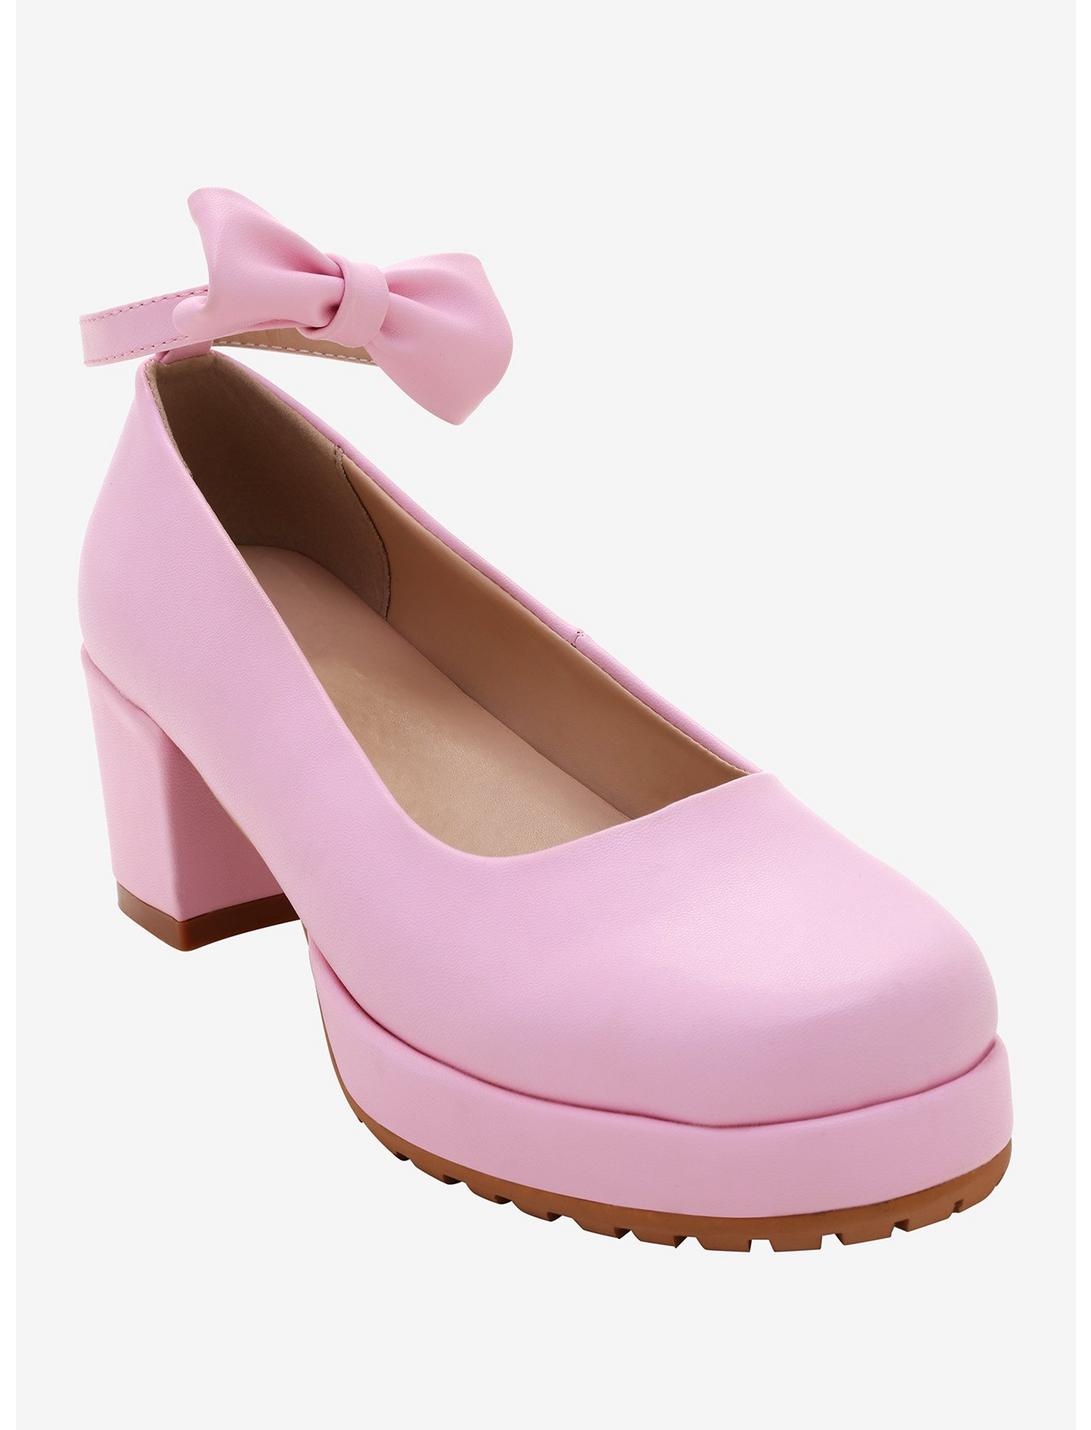 Pink Ankle Strap & Bow Heeled Mary Janes, PINK, hi-res